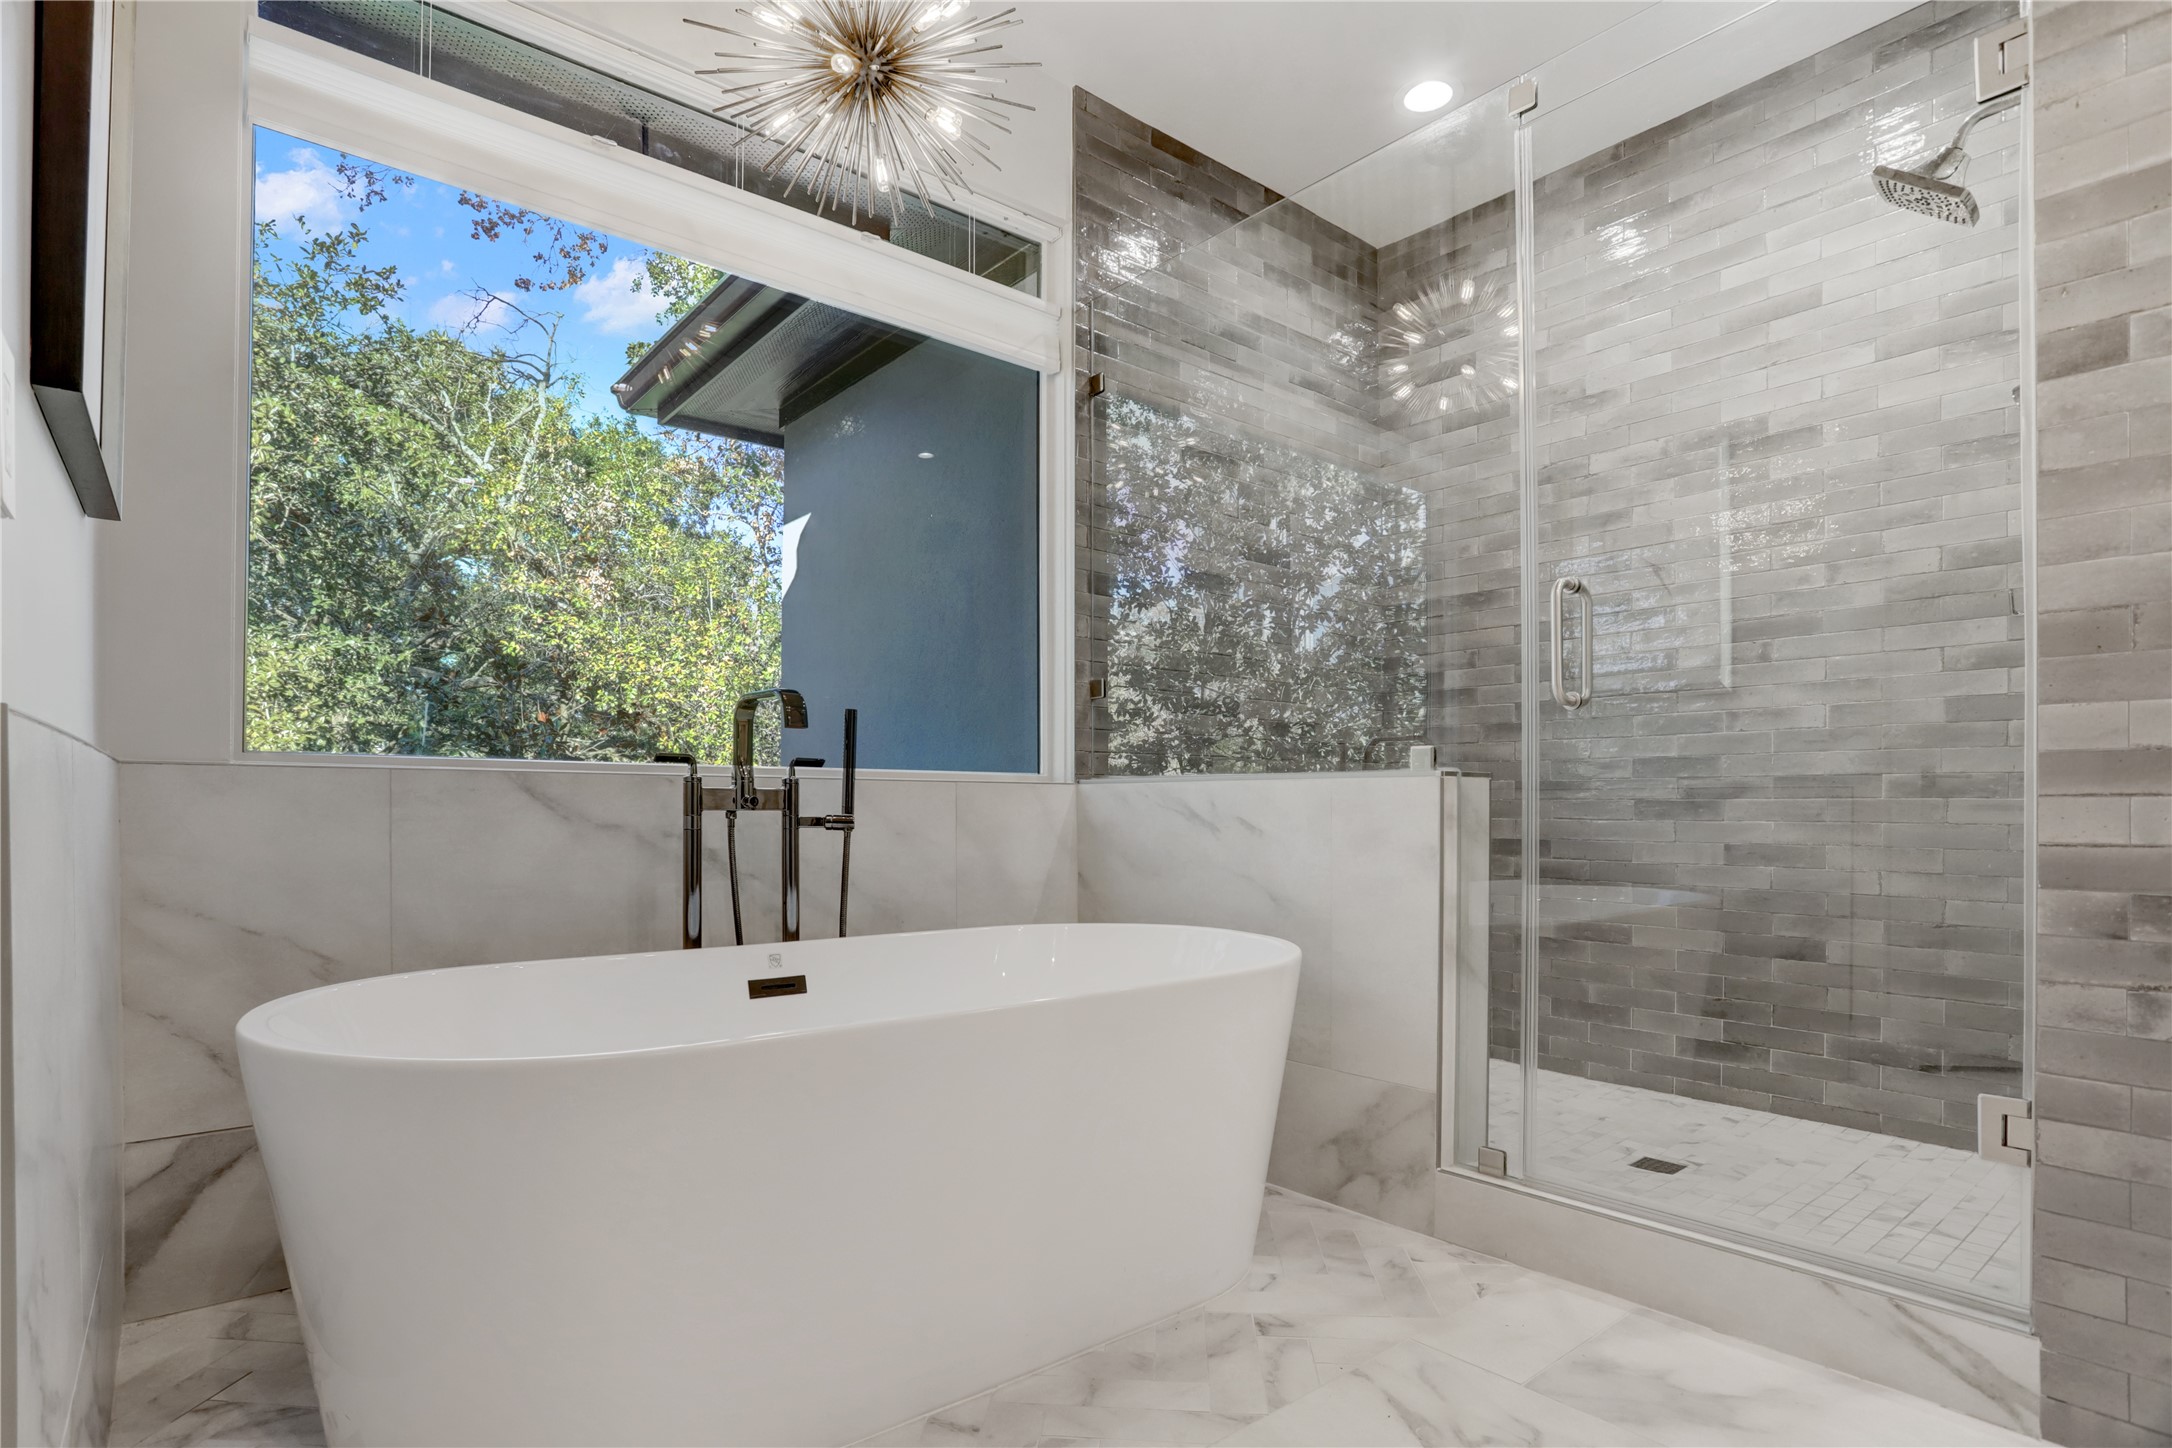 Soak in all the luxury. Floor mounted hardware impressive lighting fixture and tile work creates a statement.